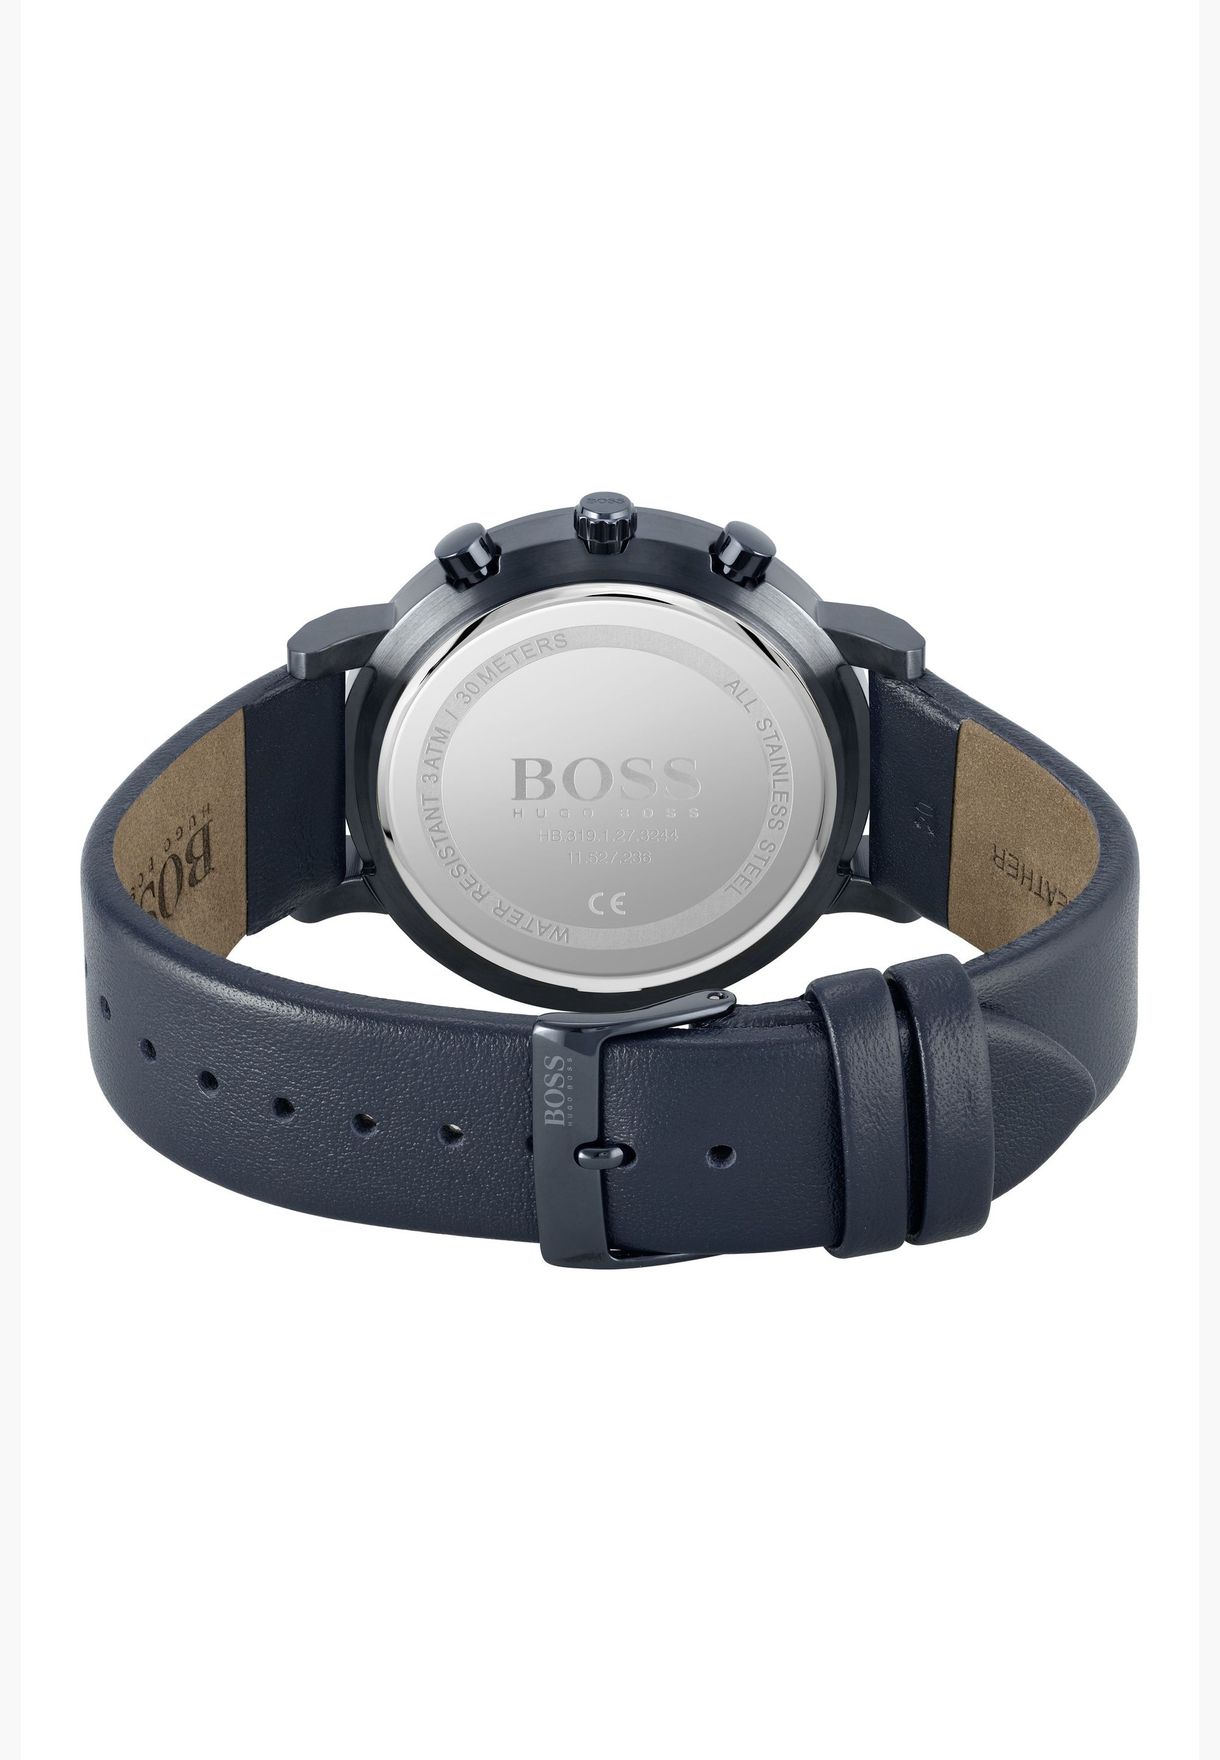 Hugo Boss INTEGRITY Leather Strap Watch for Men - 1513778